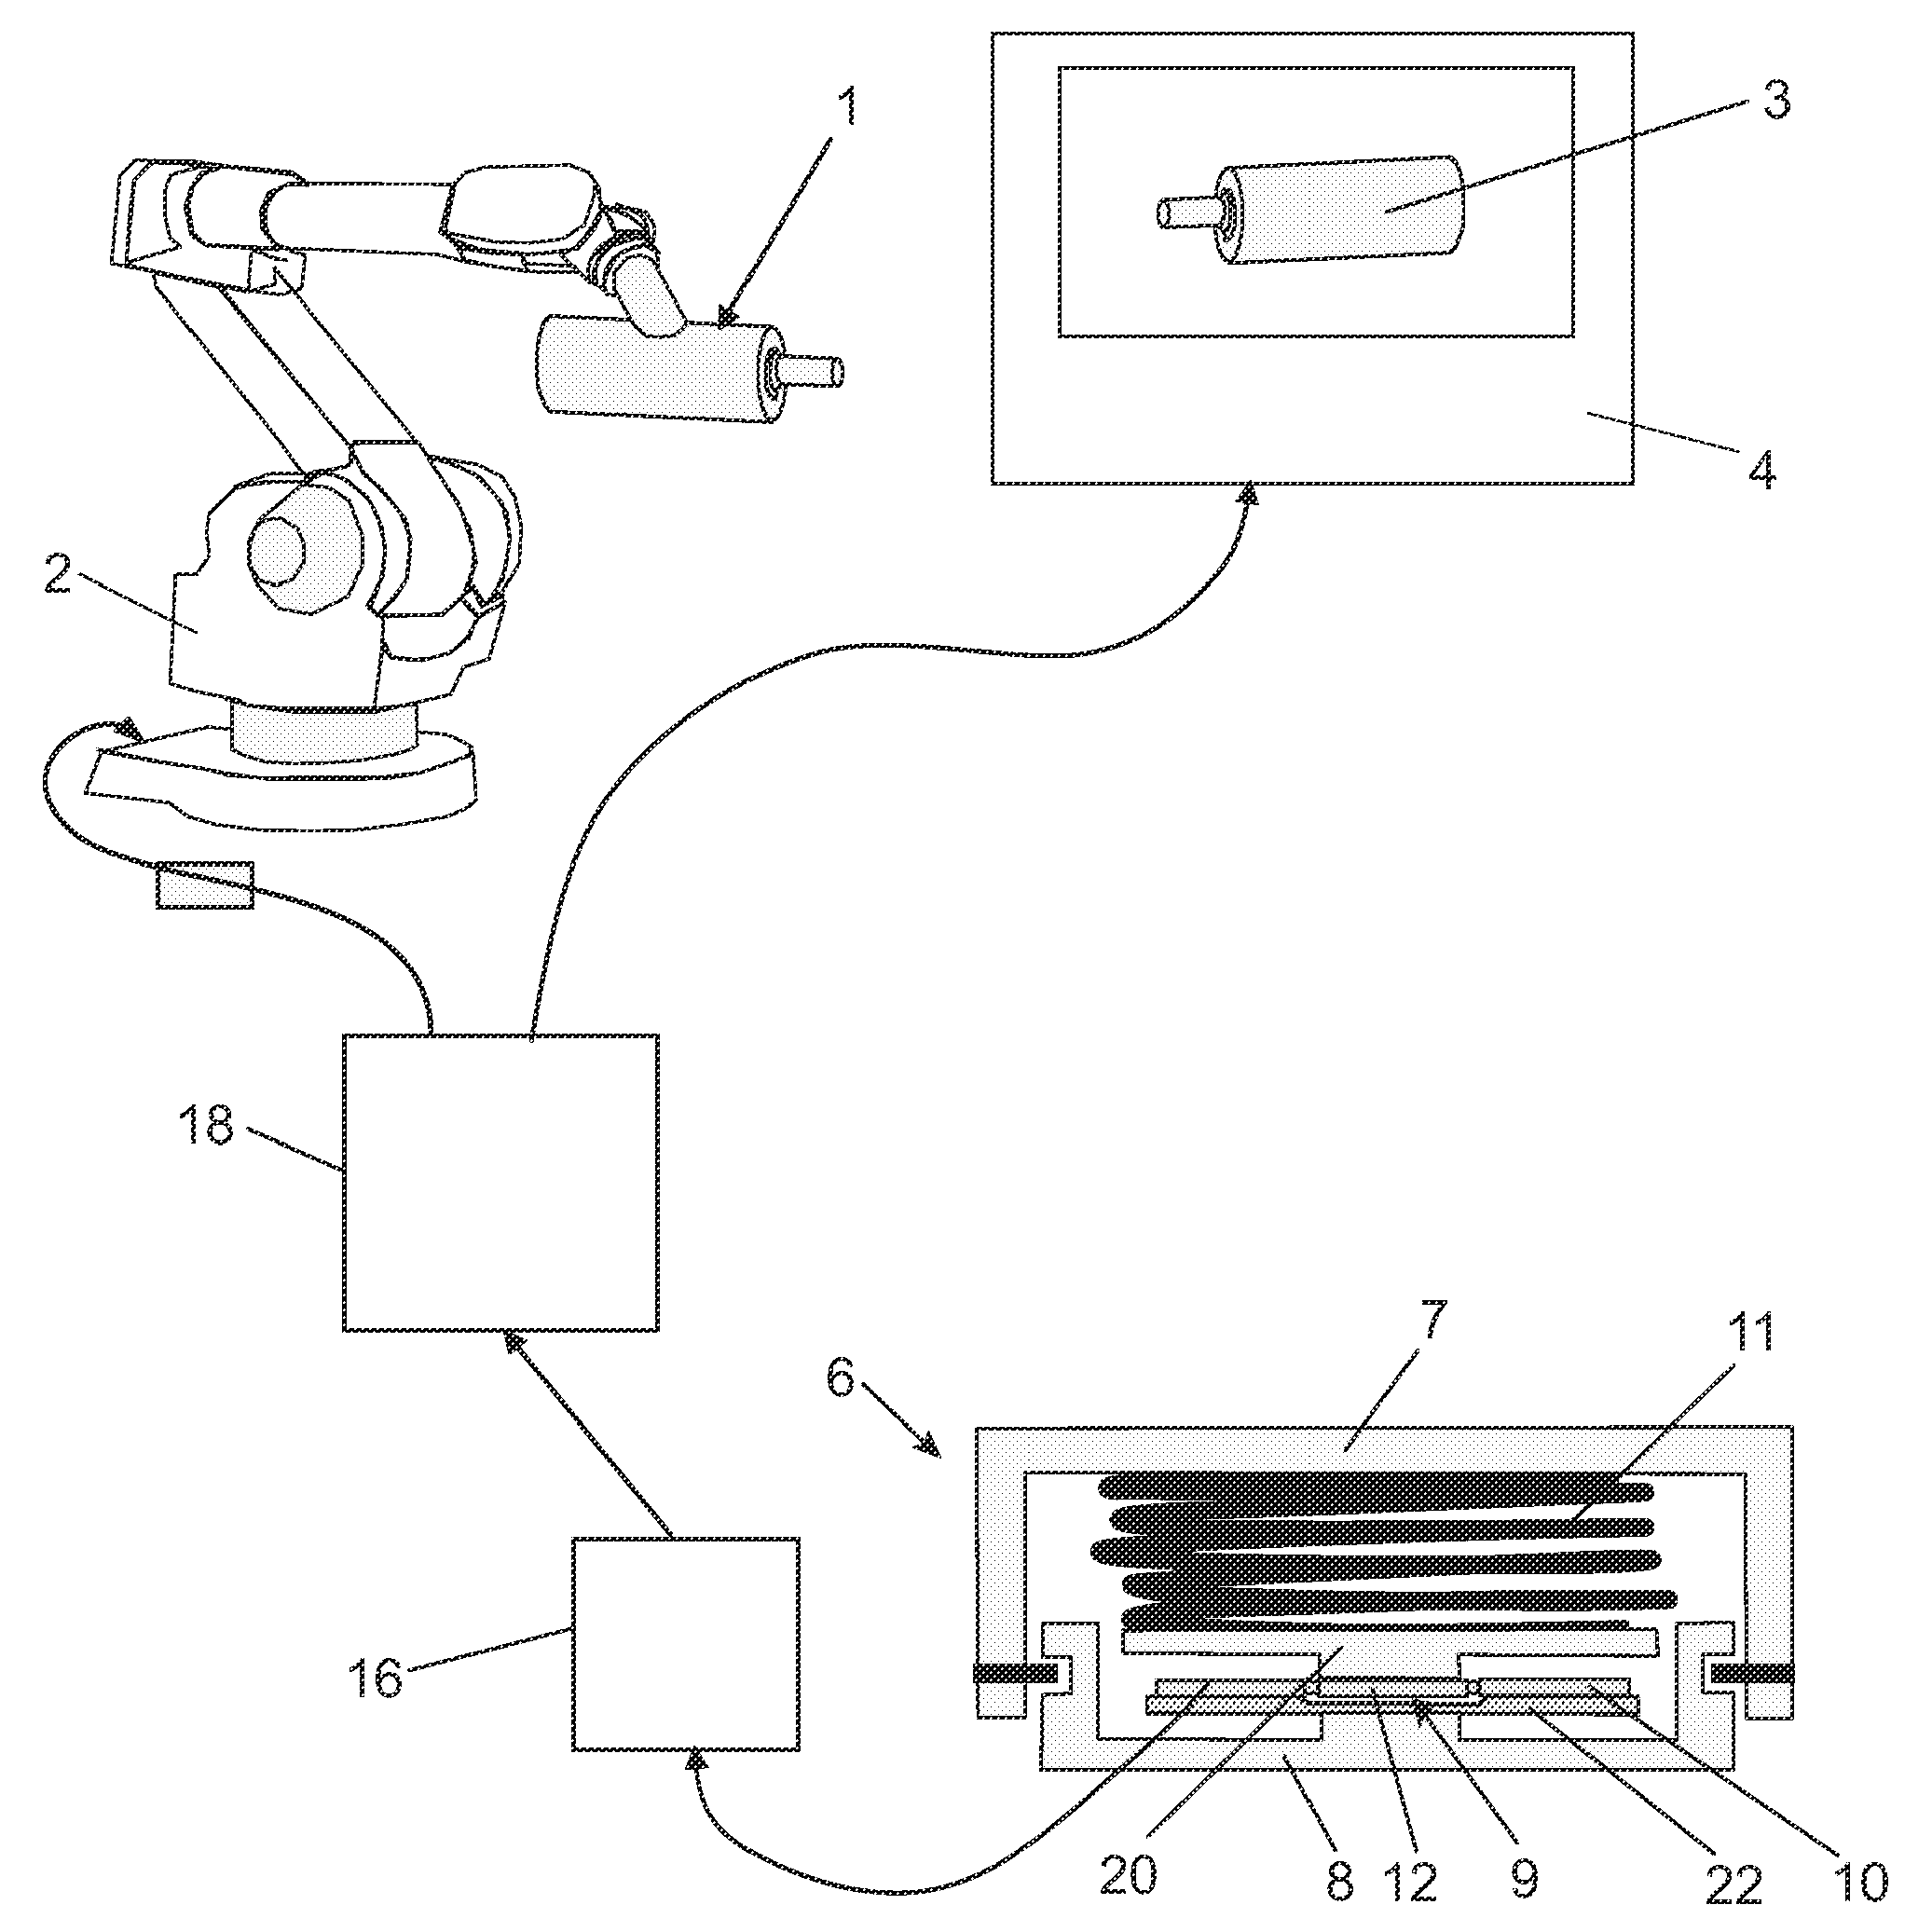 System for controlling the position and orientation of an object in dependence on received forces and torques from a user